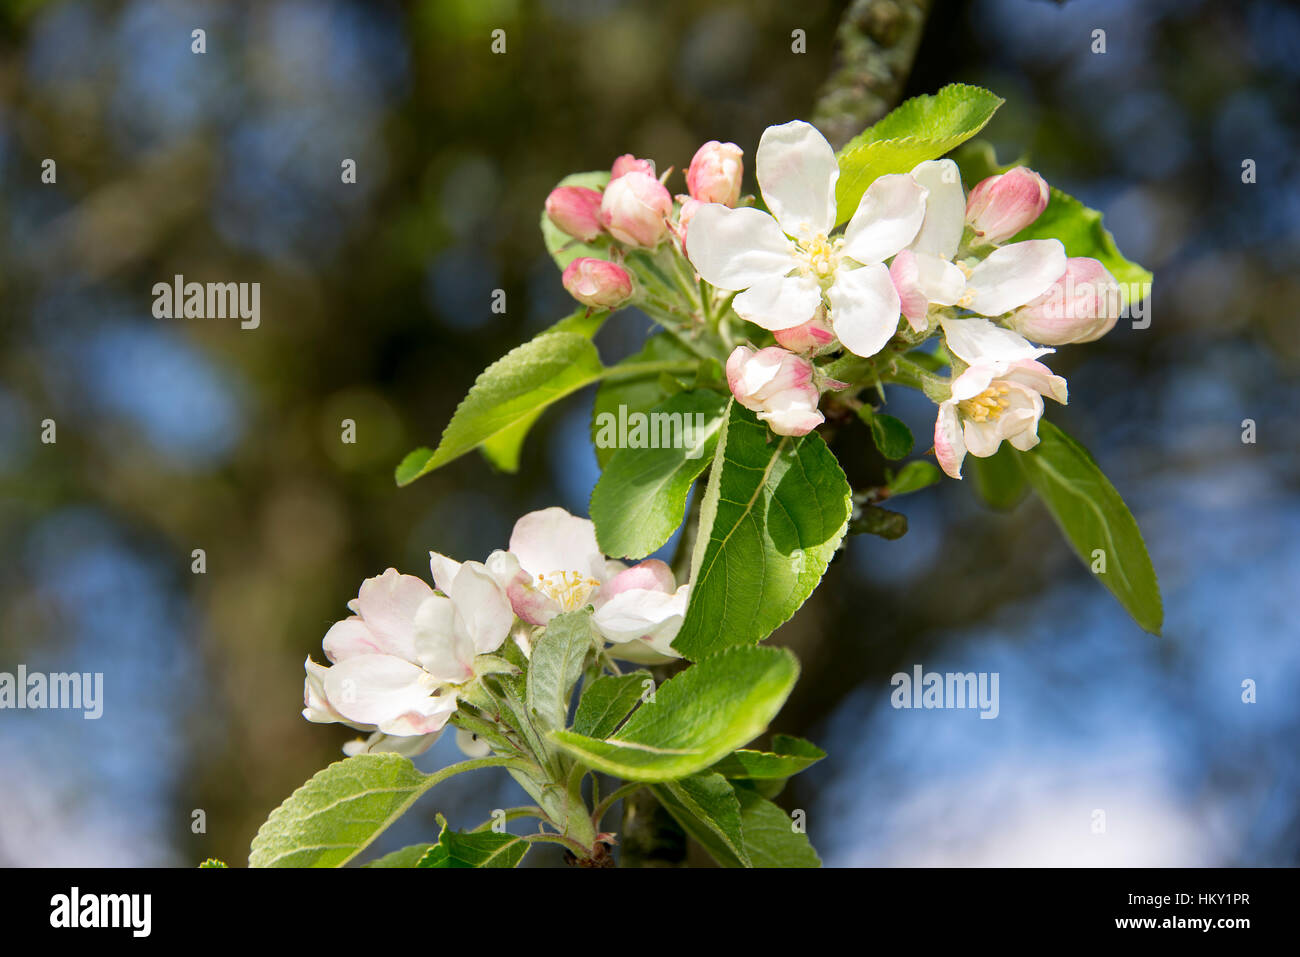 Small apple tree branch with pink and white apple blossom flowers and green leaves Stock Photo